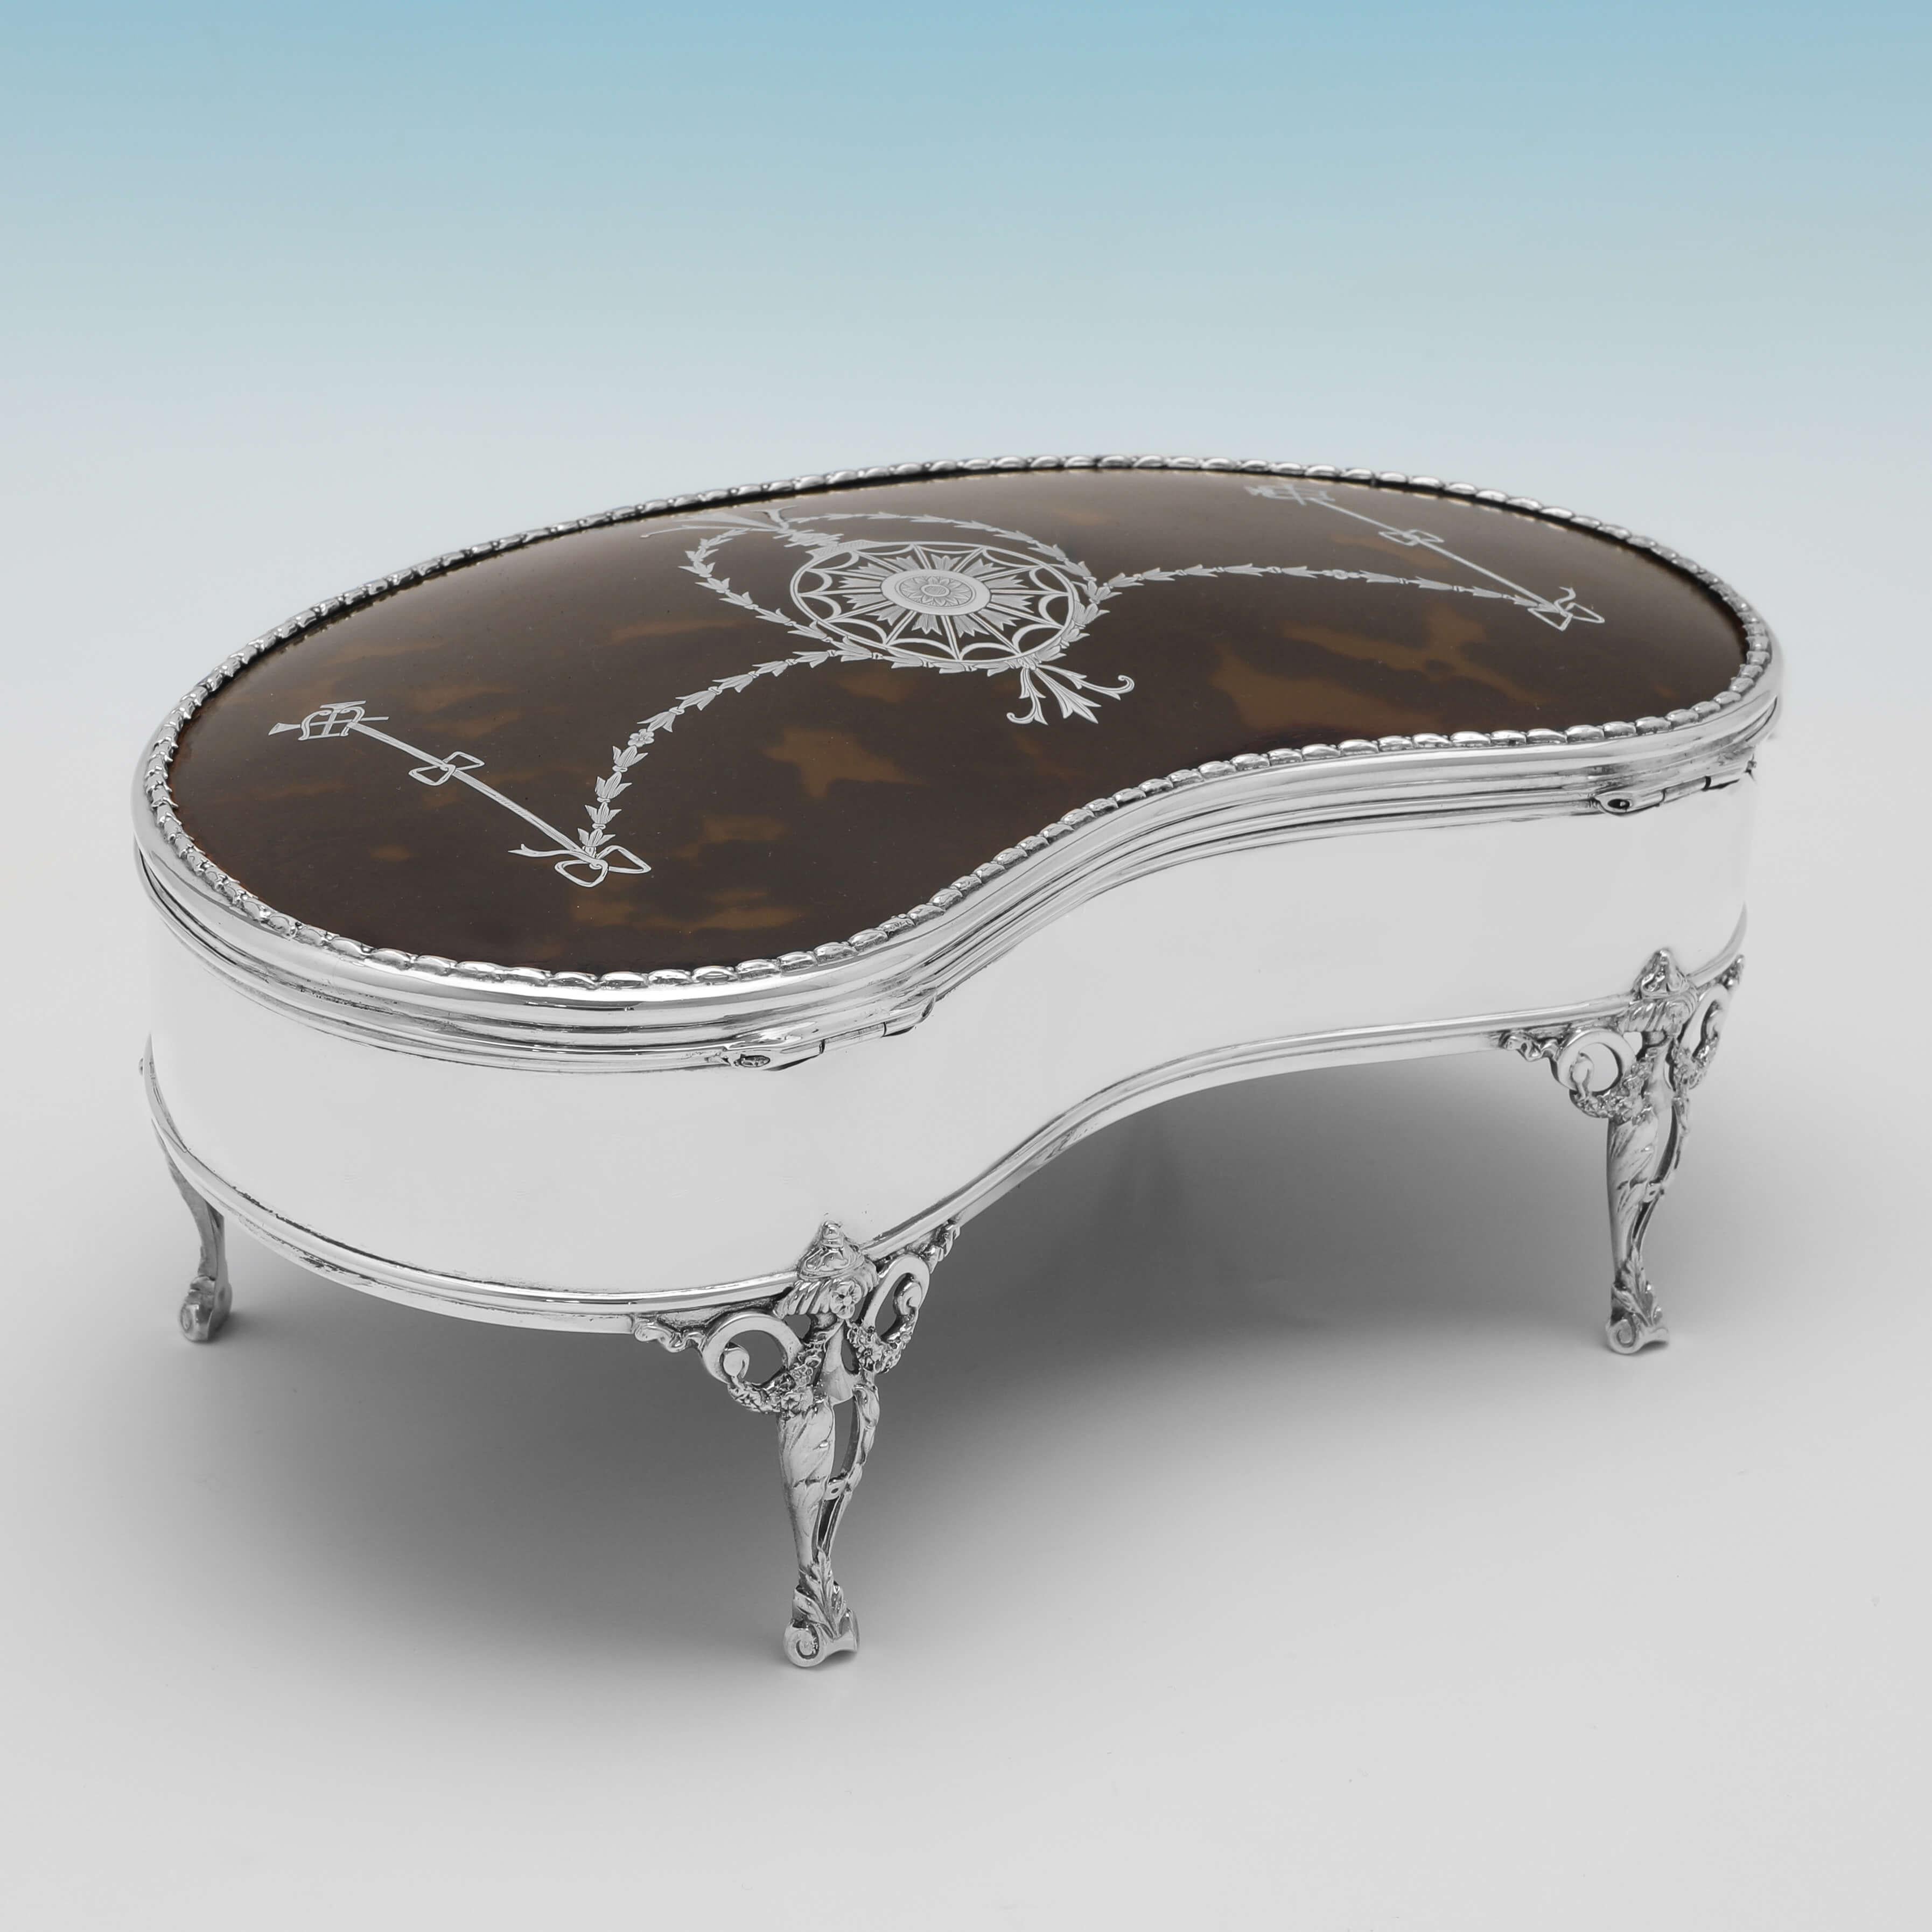 Hallmarked in London in 1911 by William Comyns, this attractive, Antique Sterling Silver Jewellery Box, is kidney shaped, and features a tortoiseshell lid with silver inlay, 4 neoclassical legs, and a lined interior. 

The jewellery box measures